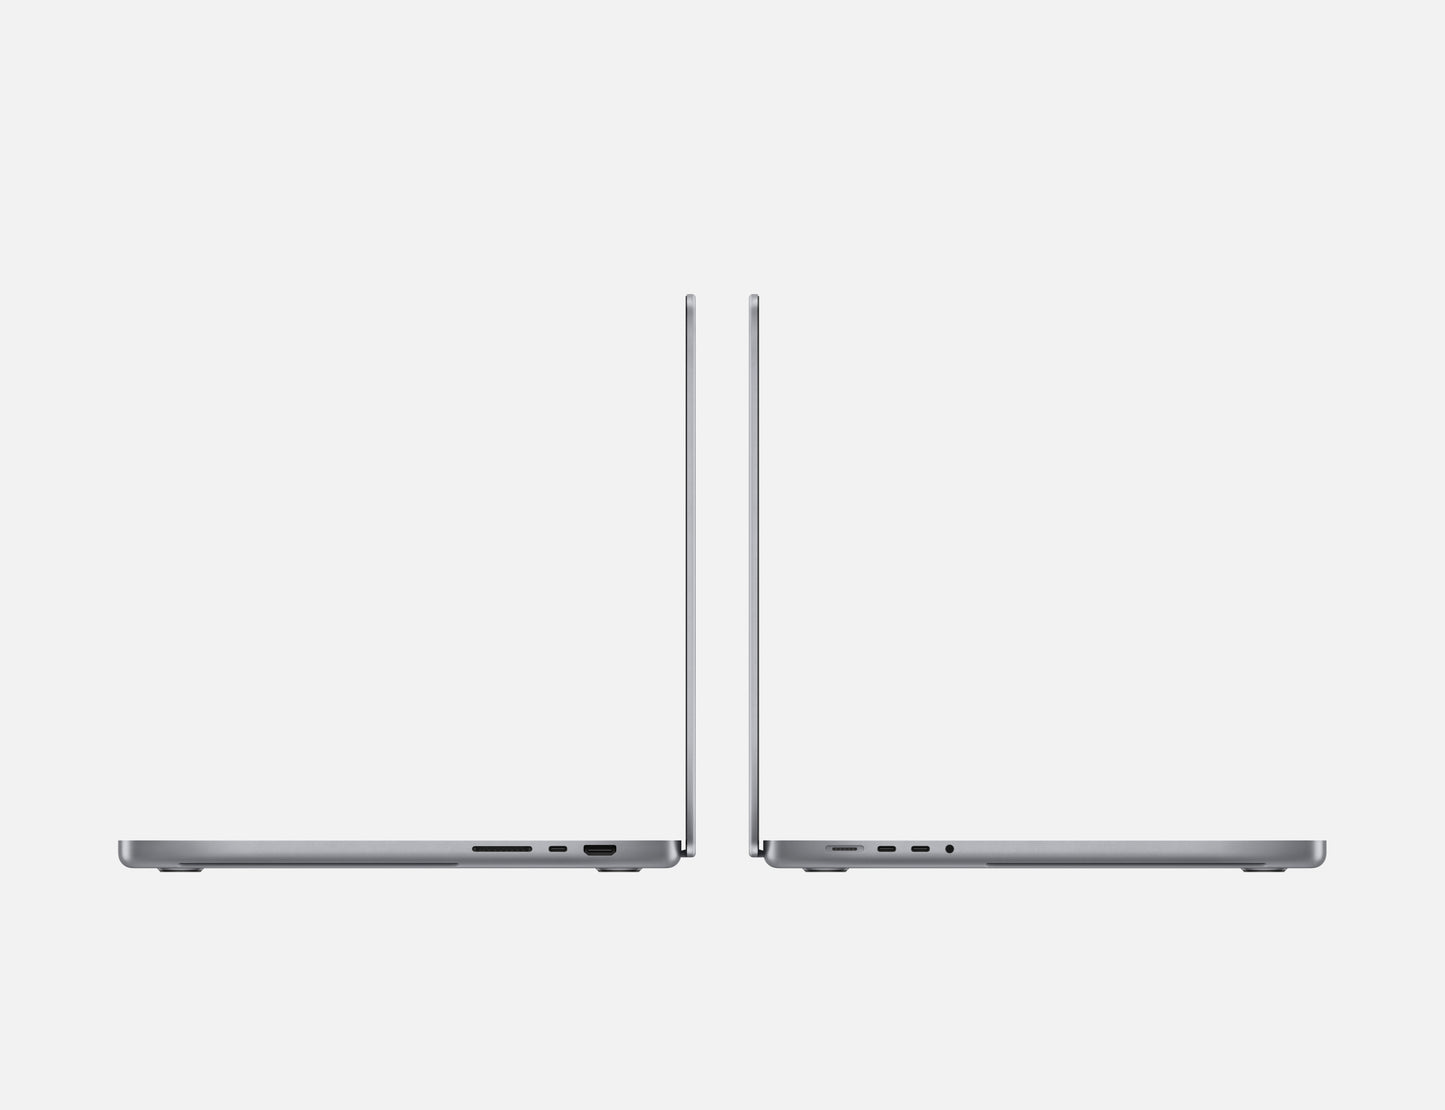 The Apple MacBook Pro 14'' M2 Max is a high-performance laptop designed for professionals. With 32GB of memory and 1TB of storage, it delivers top-of-the-line performance and portability in a sleek design.